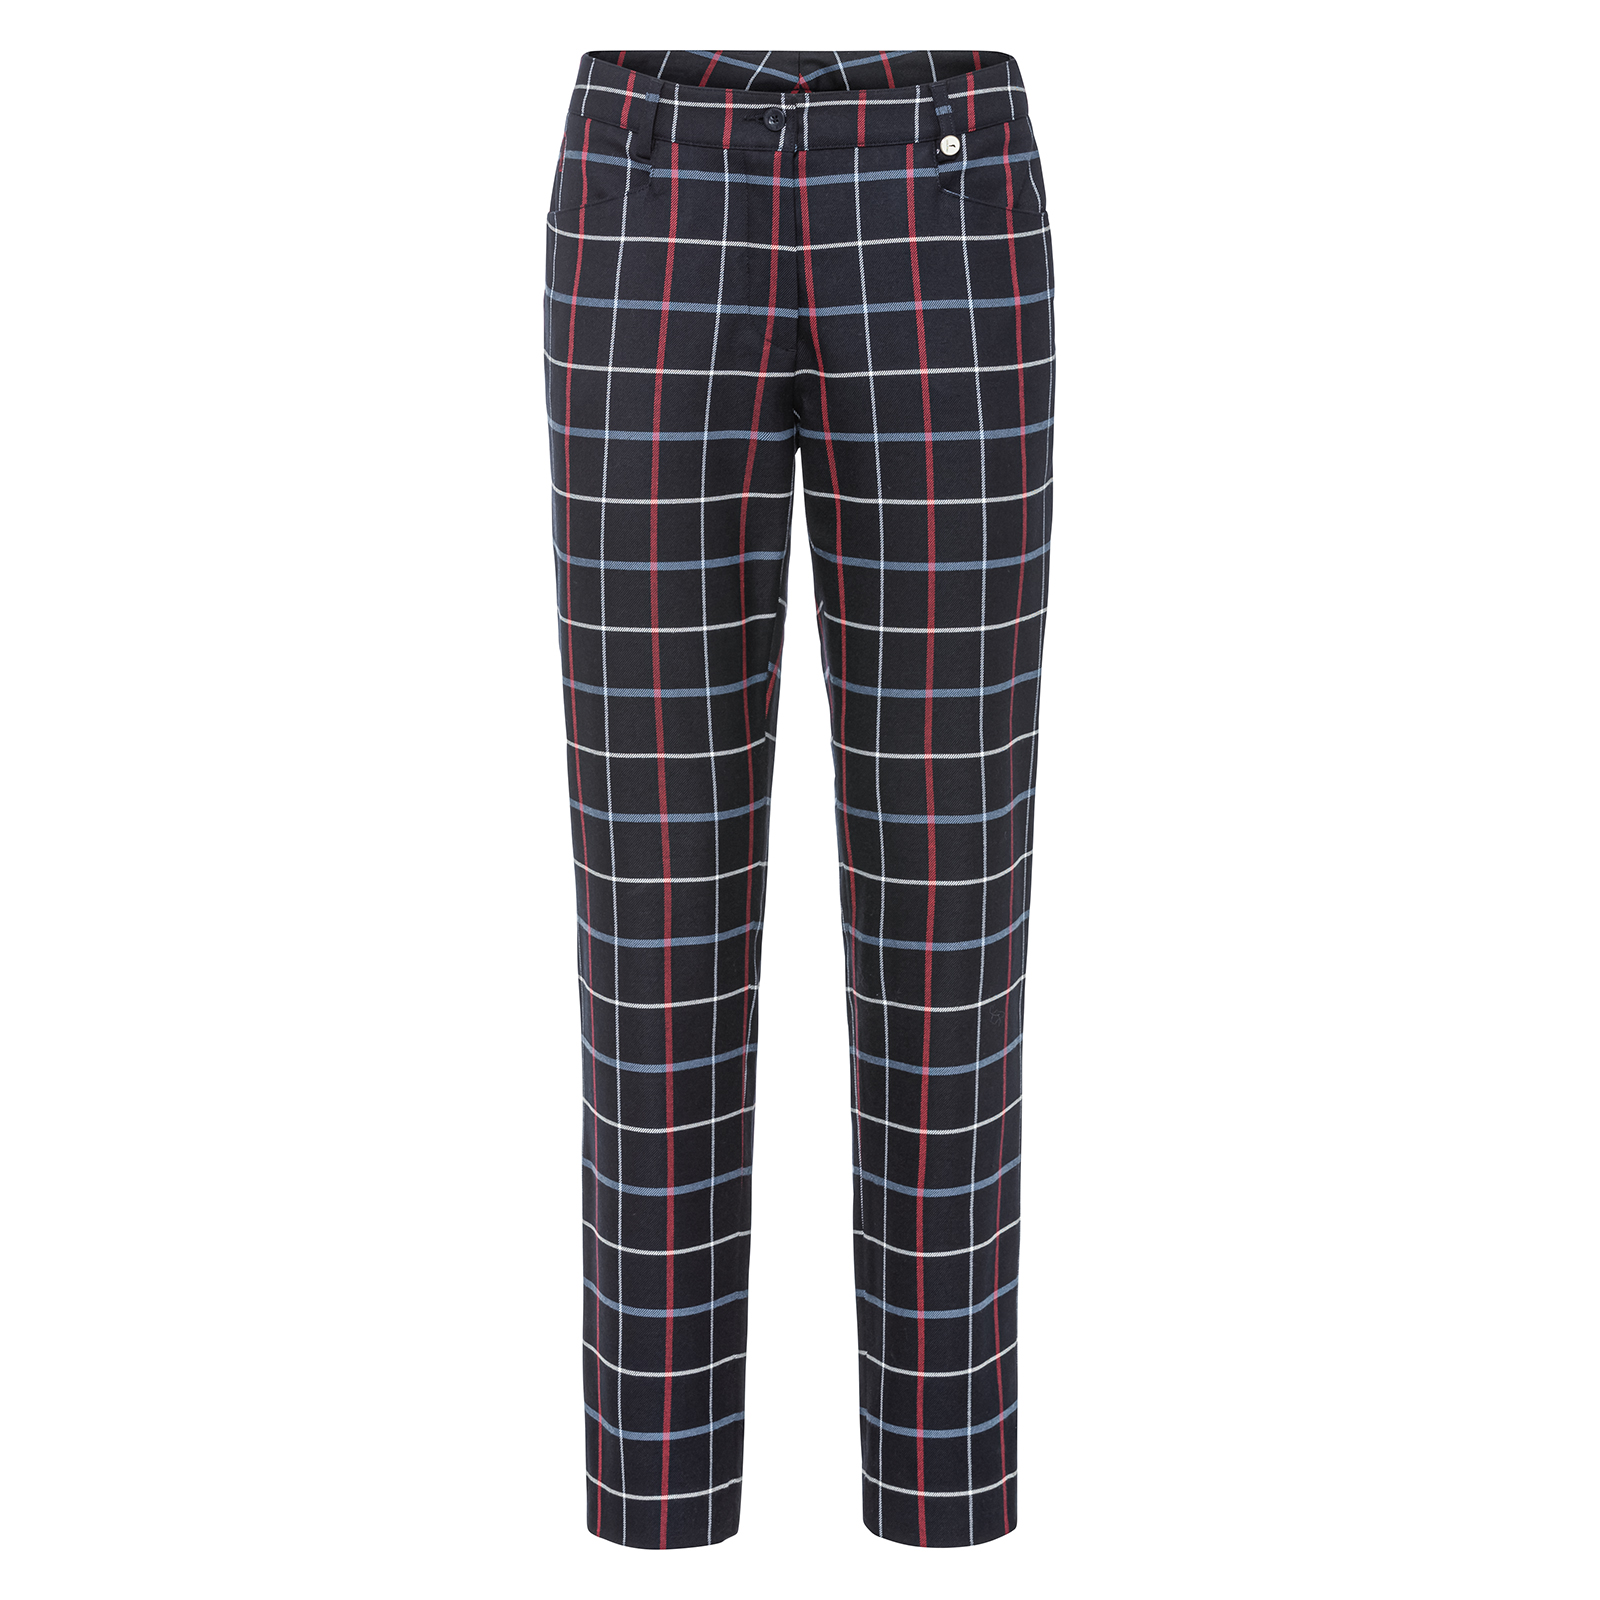 Classic ladies' golf trousers in an attractive check pattern with viscose